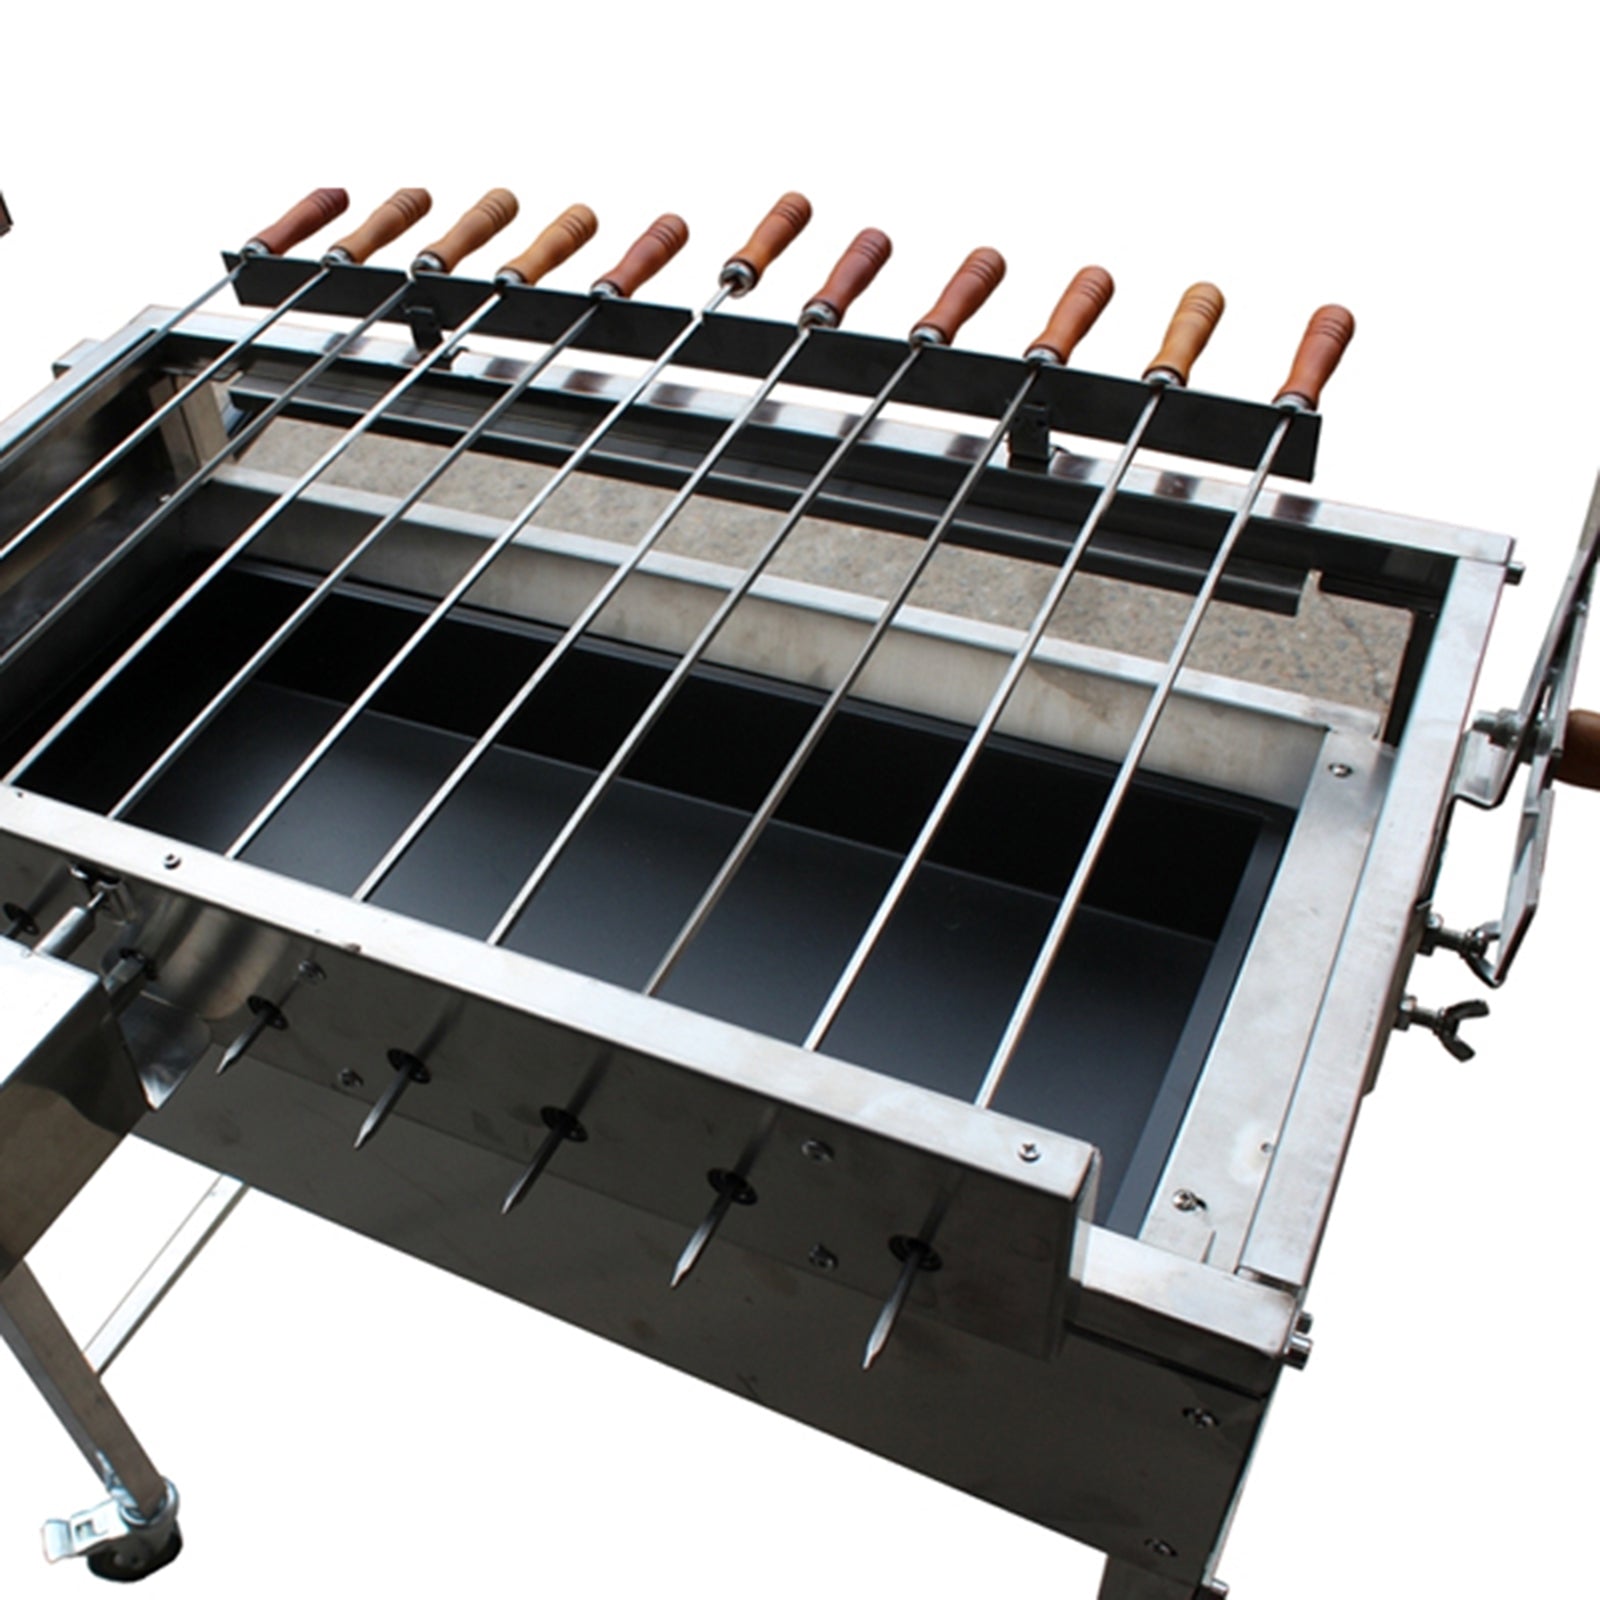 Cyprus Grill NEW with height adjustment Stainless Steel BBQ Spit Rotisserie - CG-0707C